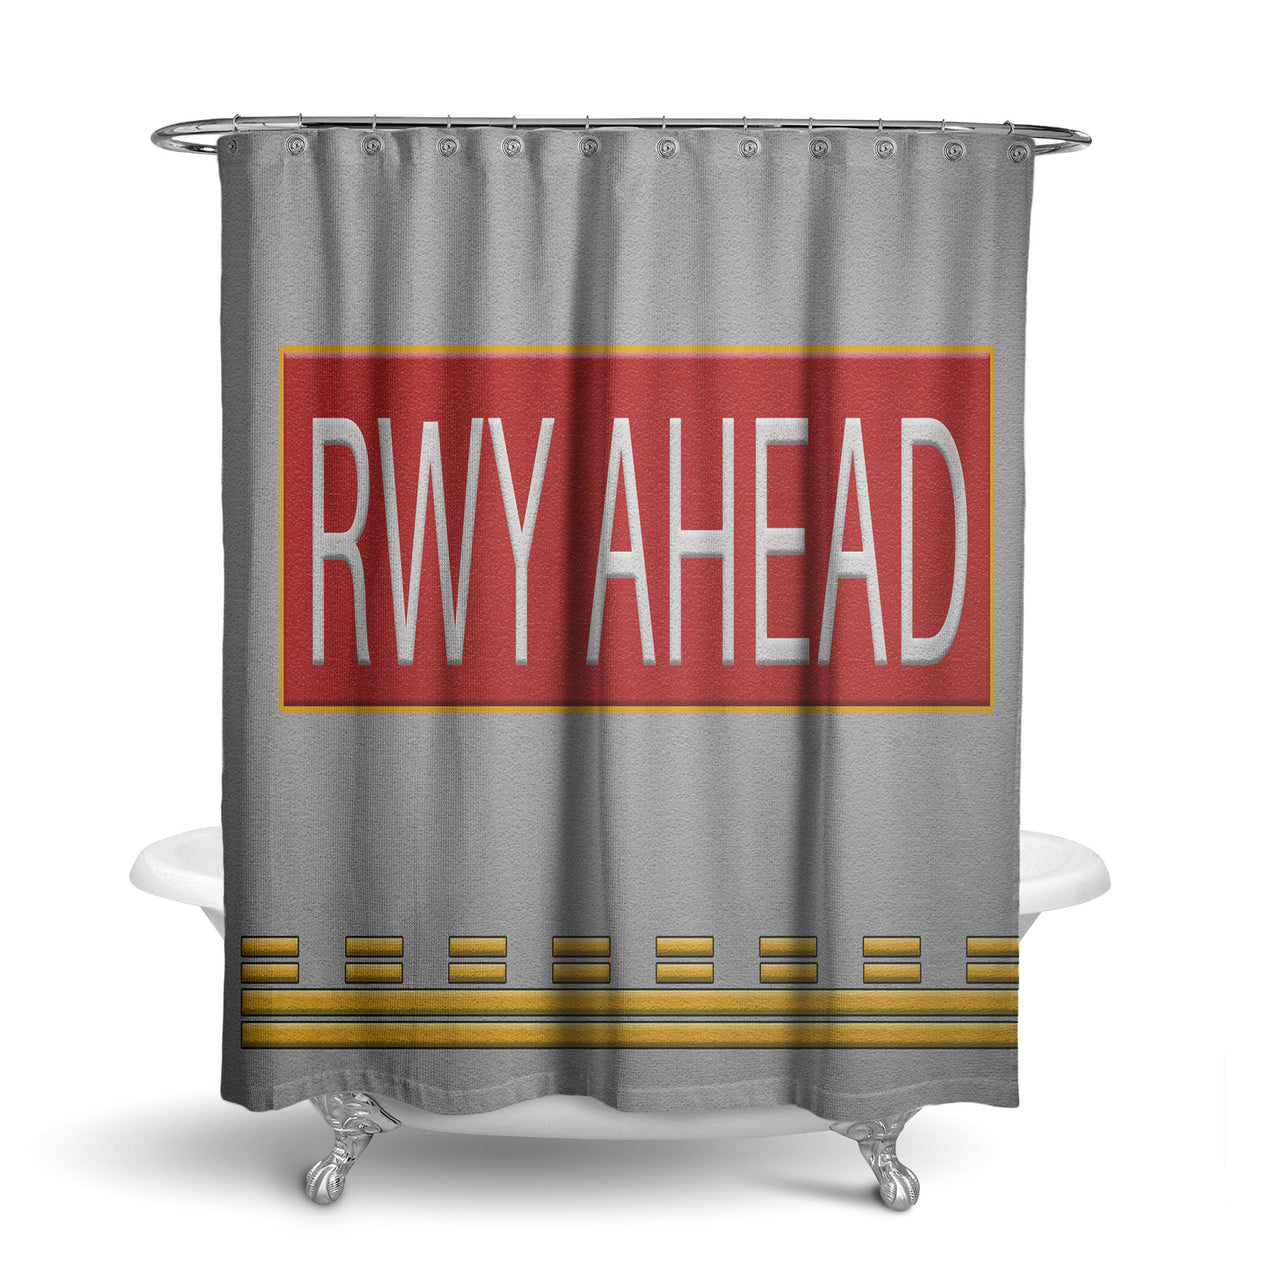 Runway Ahead Designed Shower Curtains